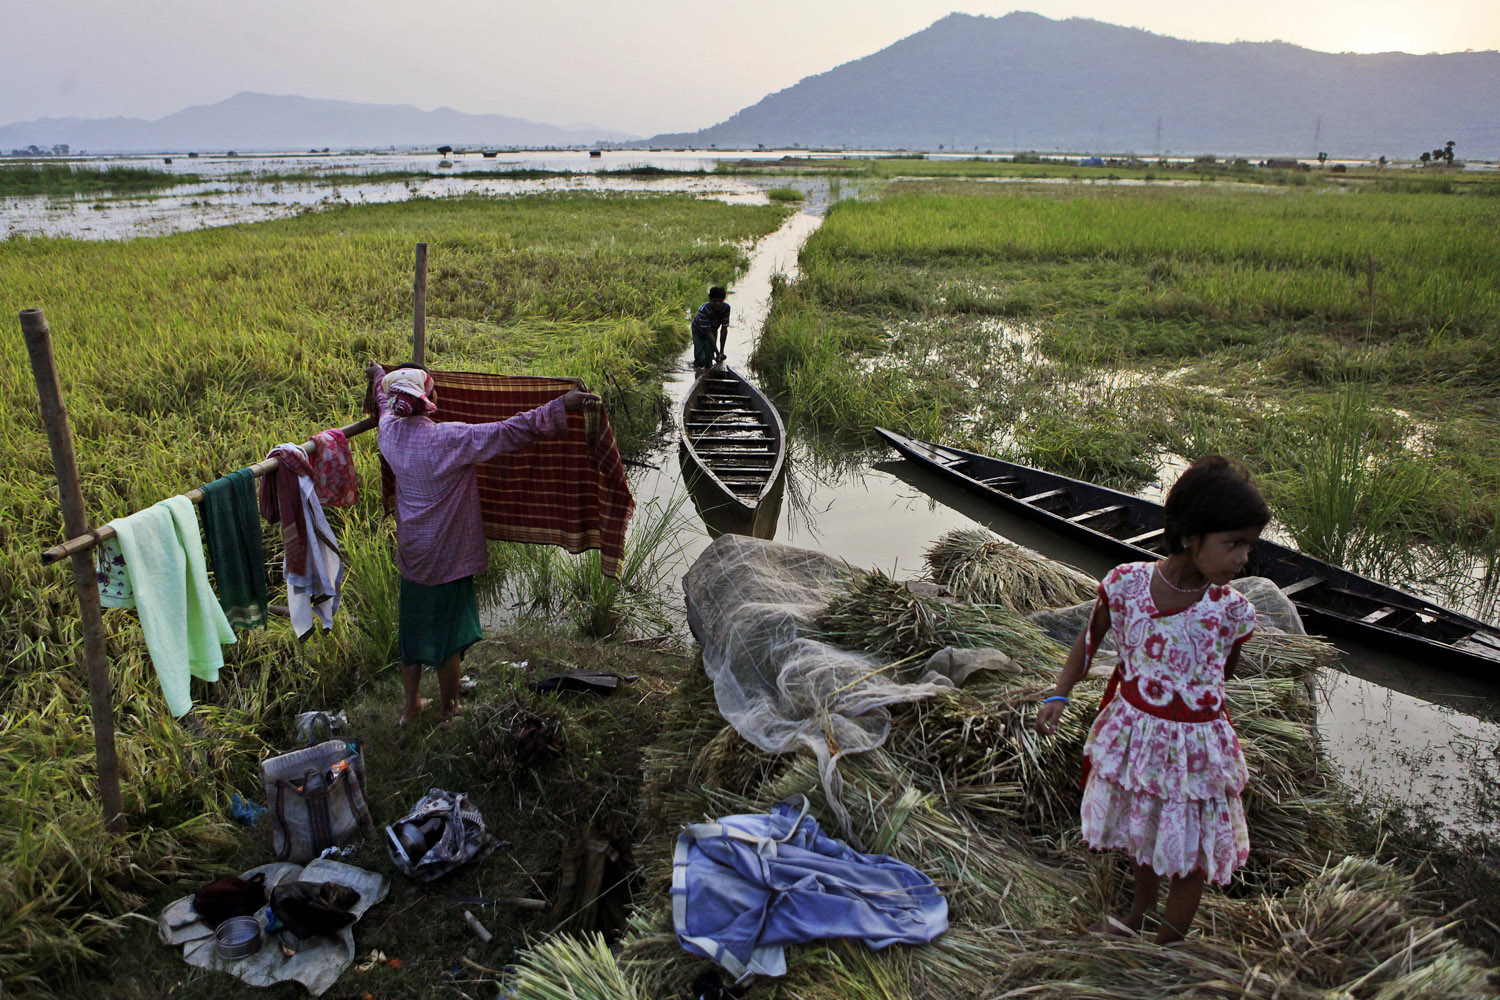 June 8, 2012. A man pushes a boat as a woman dries clothes in a paddy field flooded by rain water in Pobitora, India.